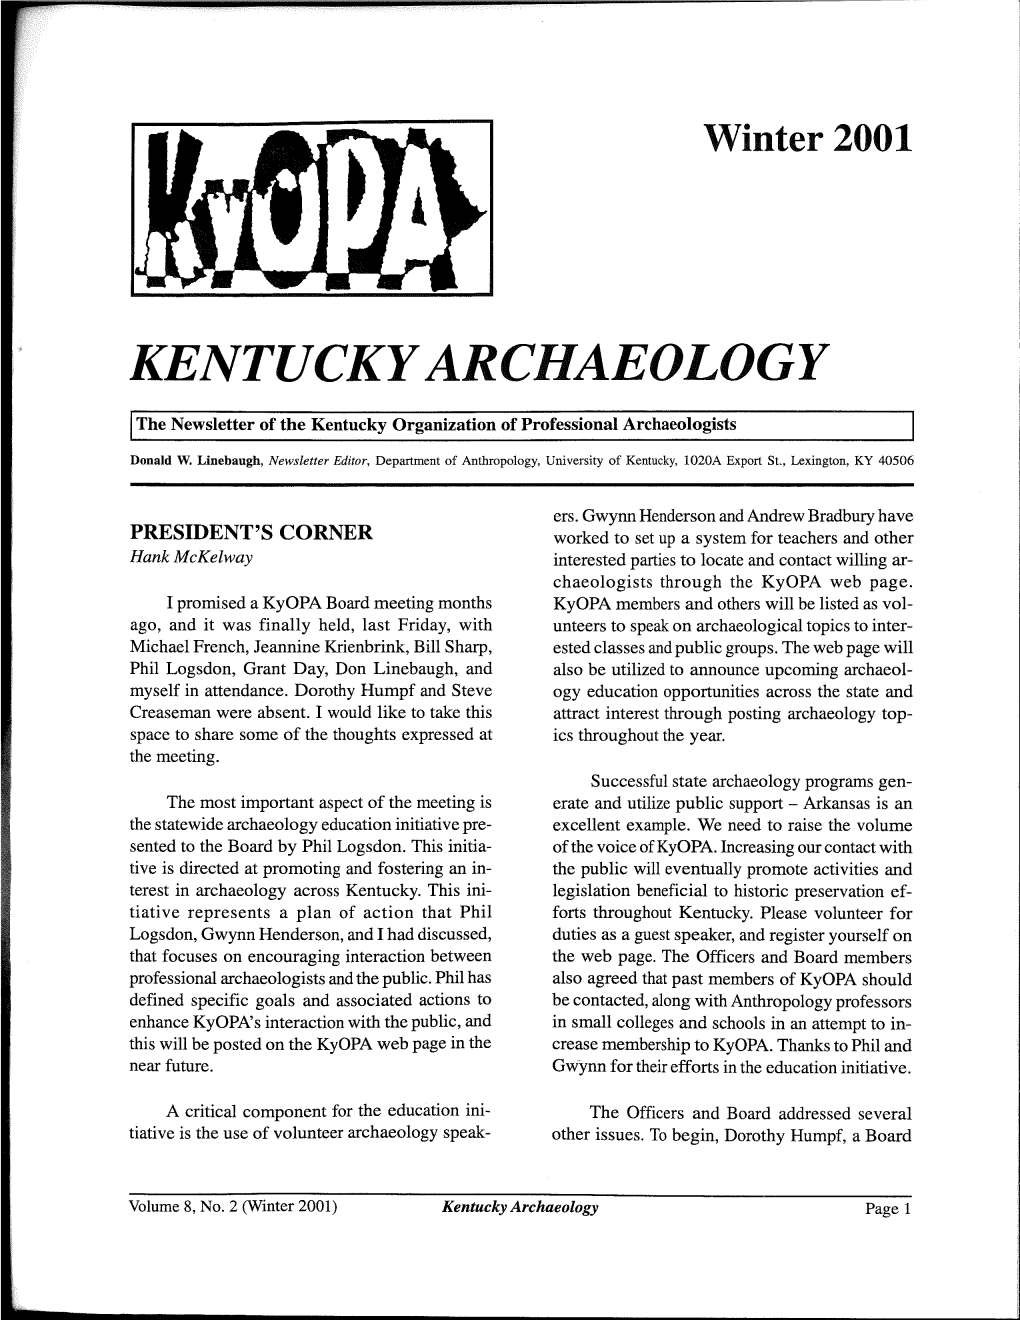 Kentucky Archaeology Page 1 Member Has Decided to Resign with Regrets